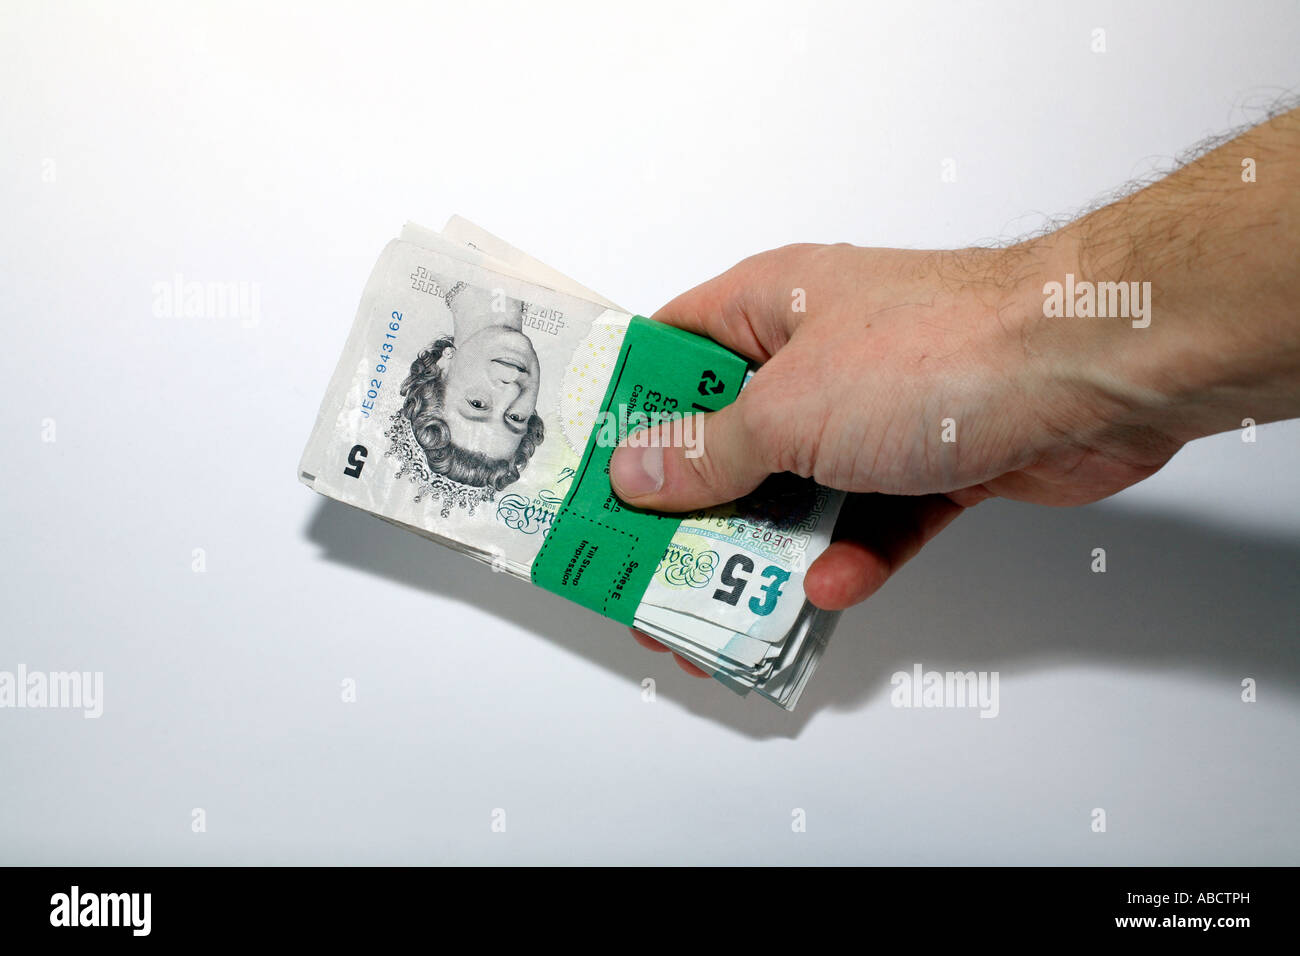 Man with bundle of five pound notes Stock Photo